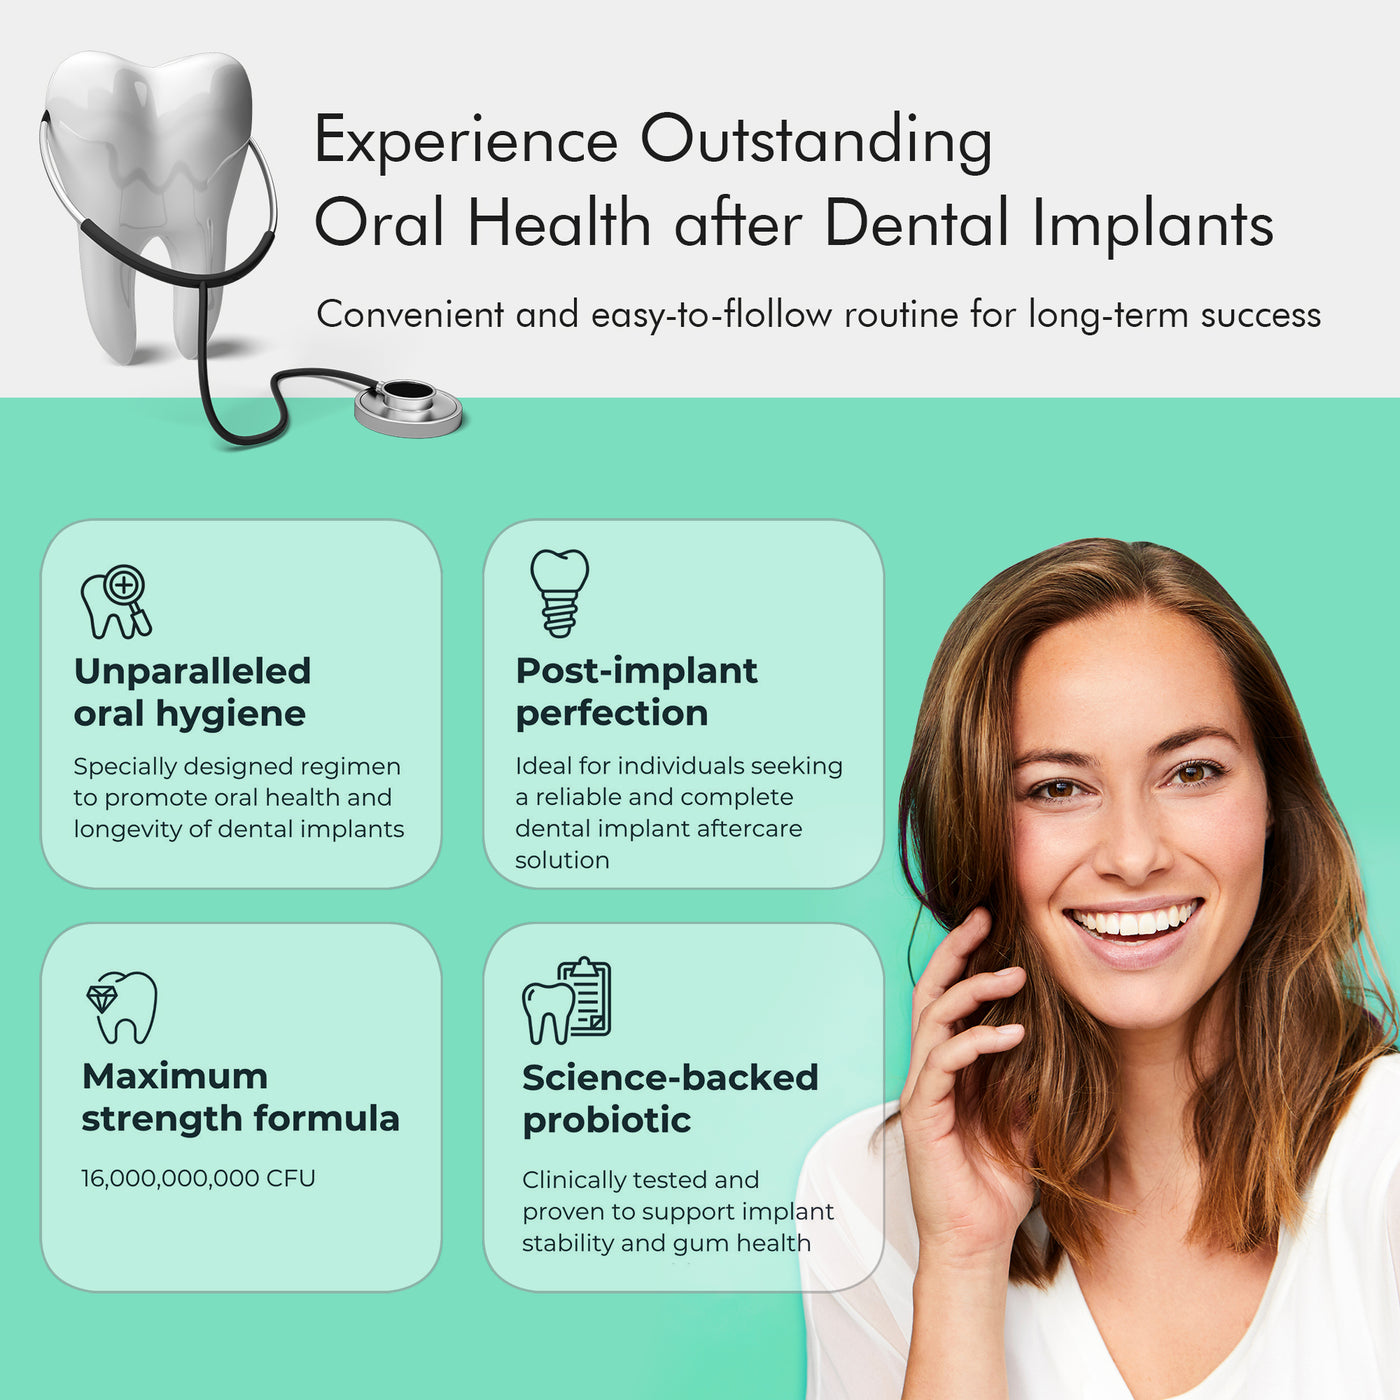 OraTicx Implantics - Experience outstanding oral health after dental implants